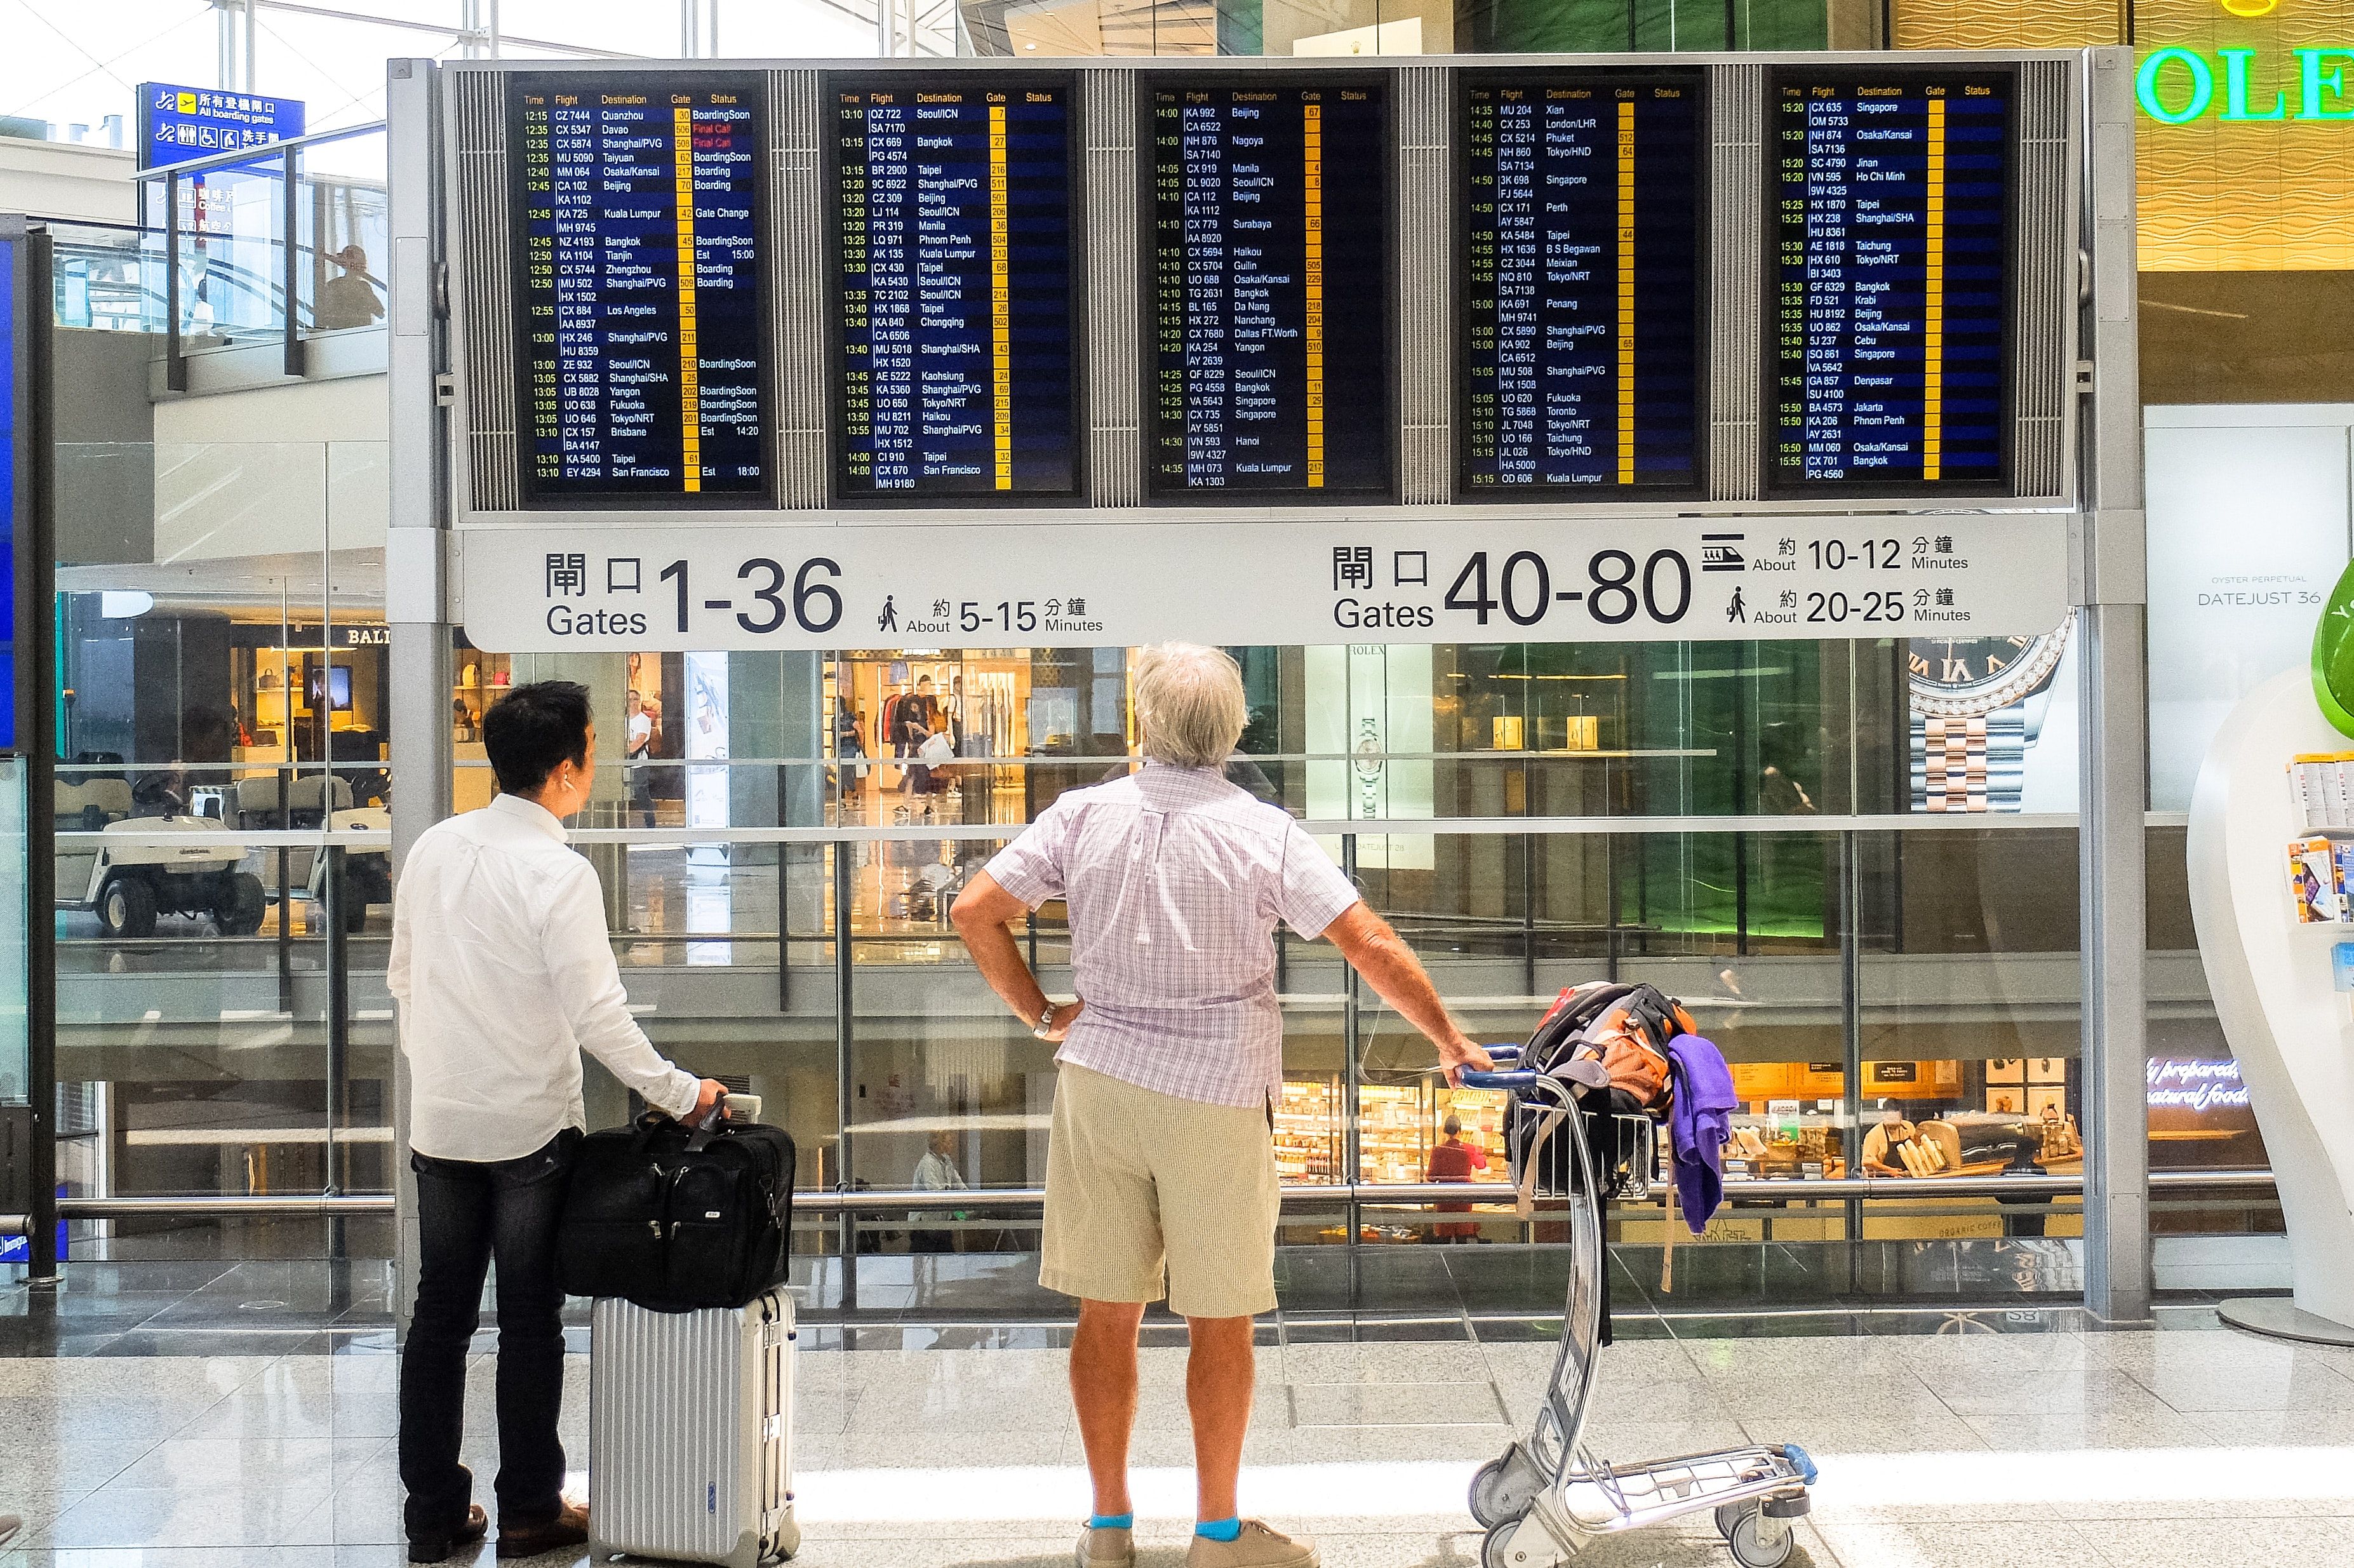 Two passengers look at a screen showing arrivals and departures in an airport terminal.